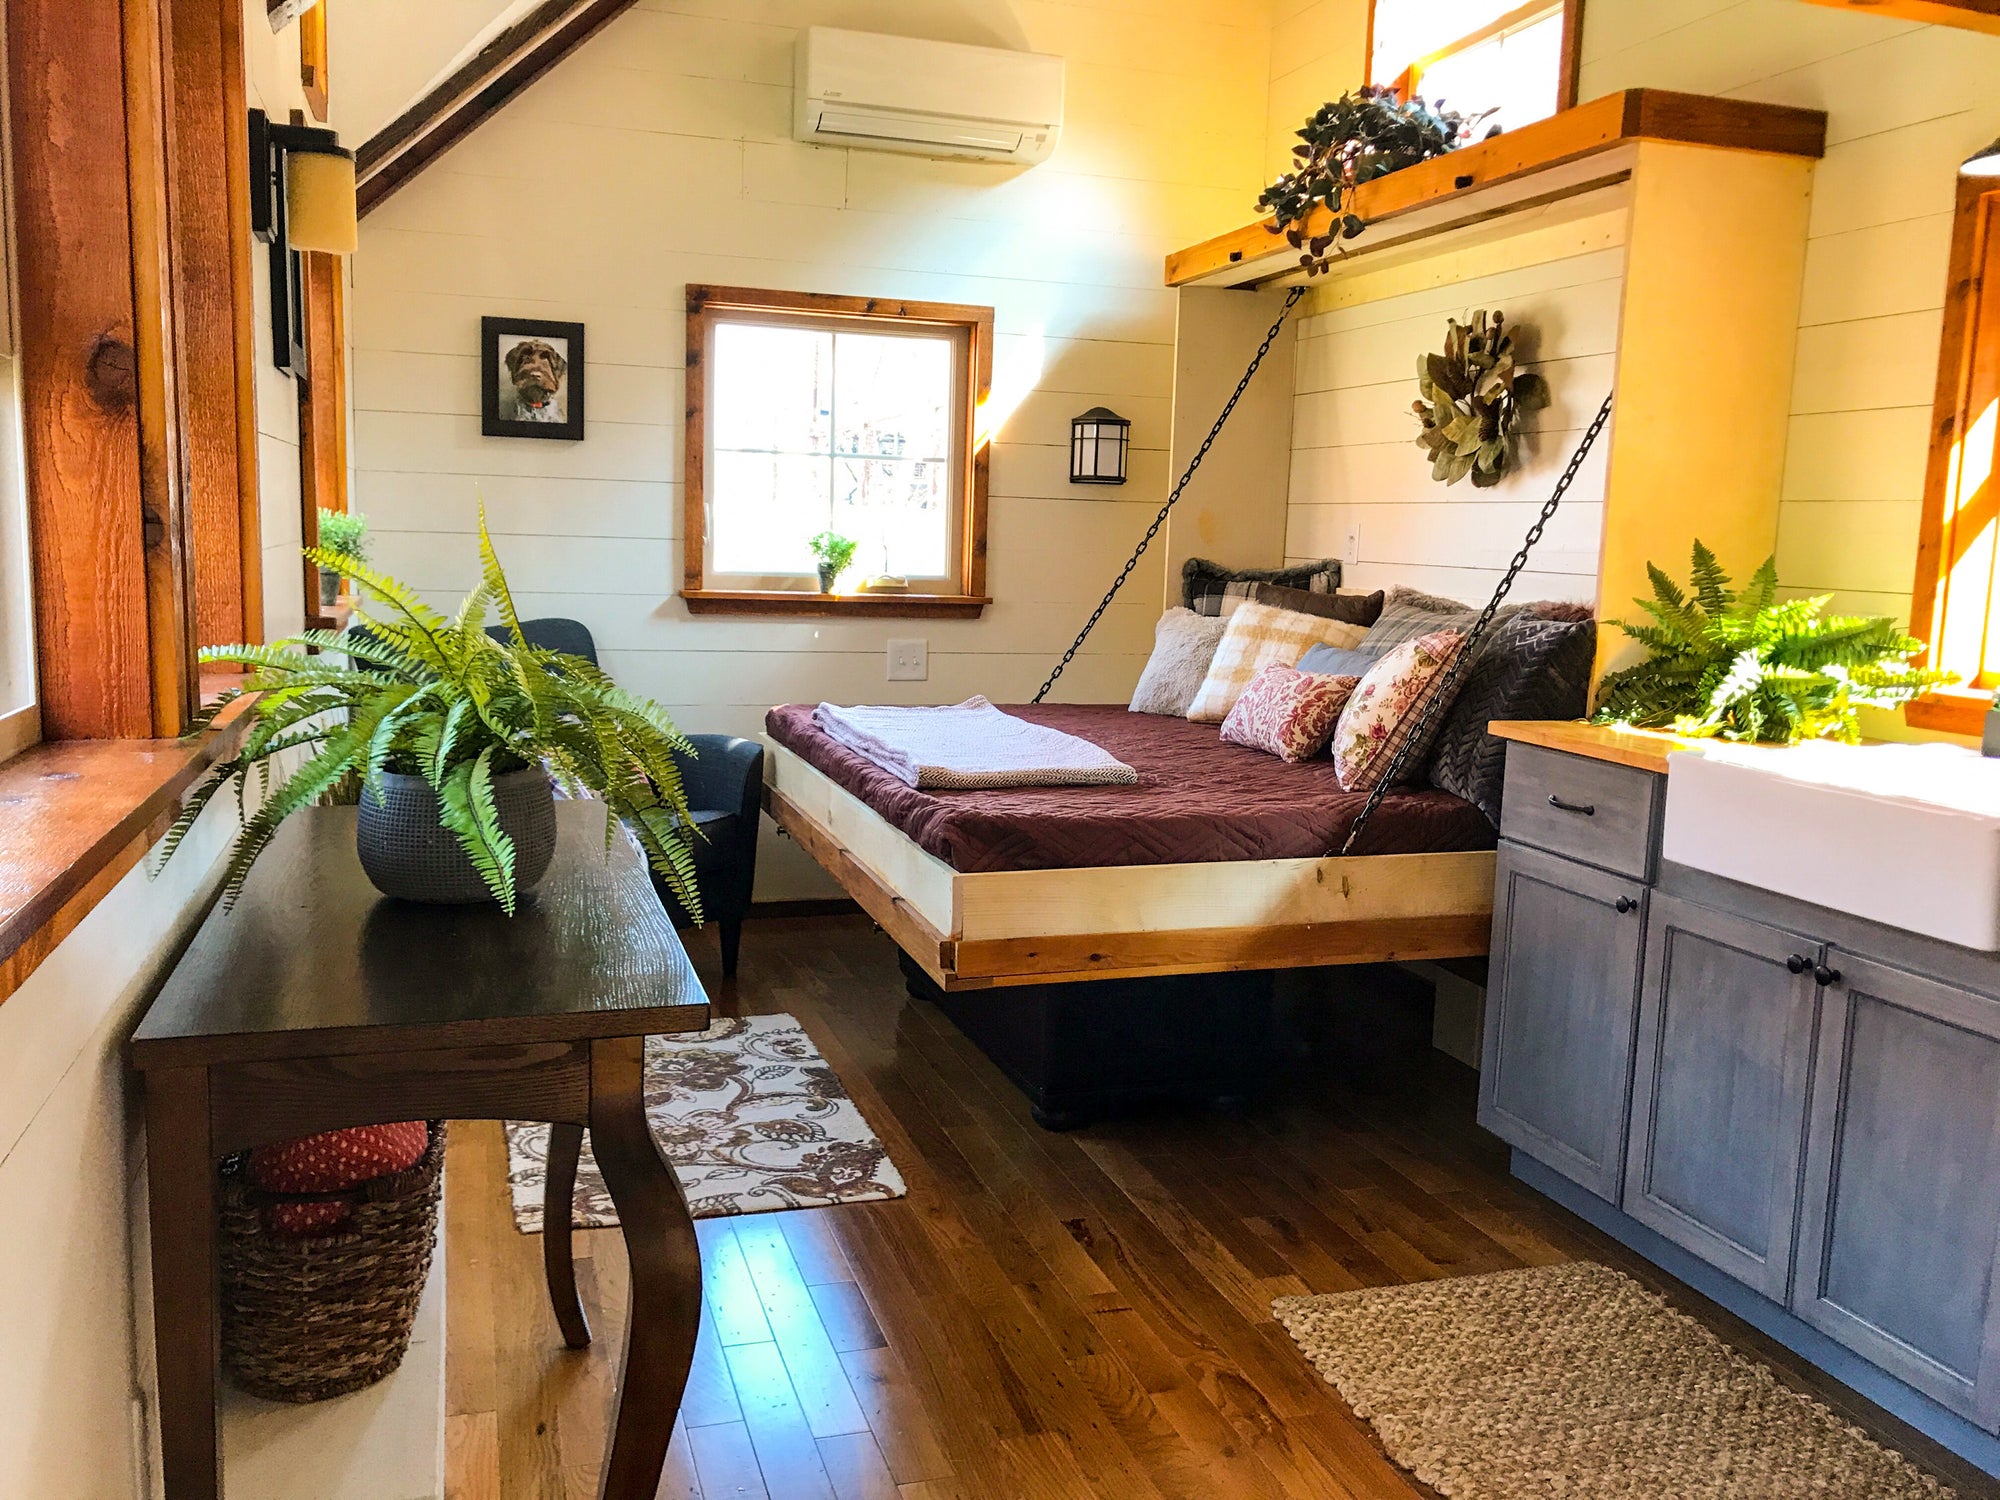 The Best Examples of Murphy Beds in Tiny Homes